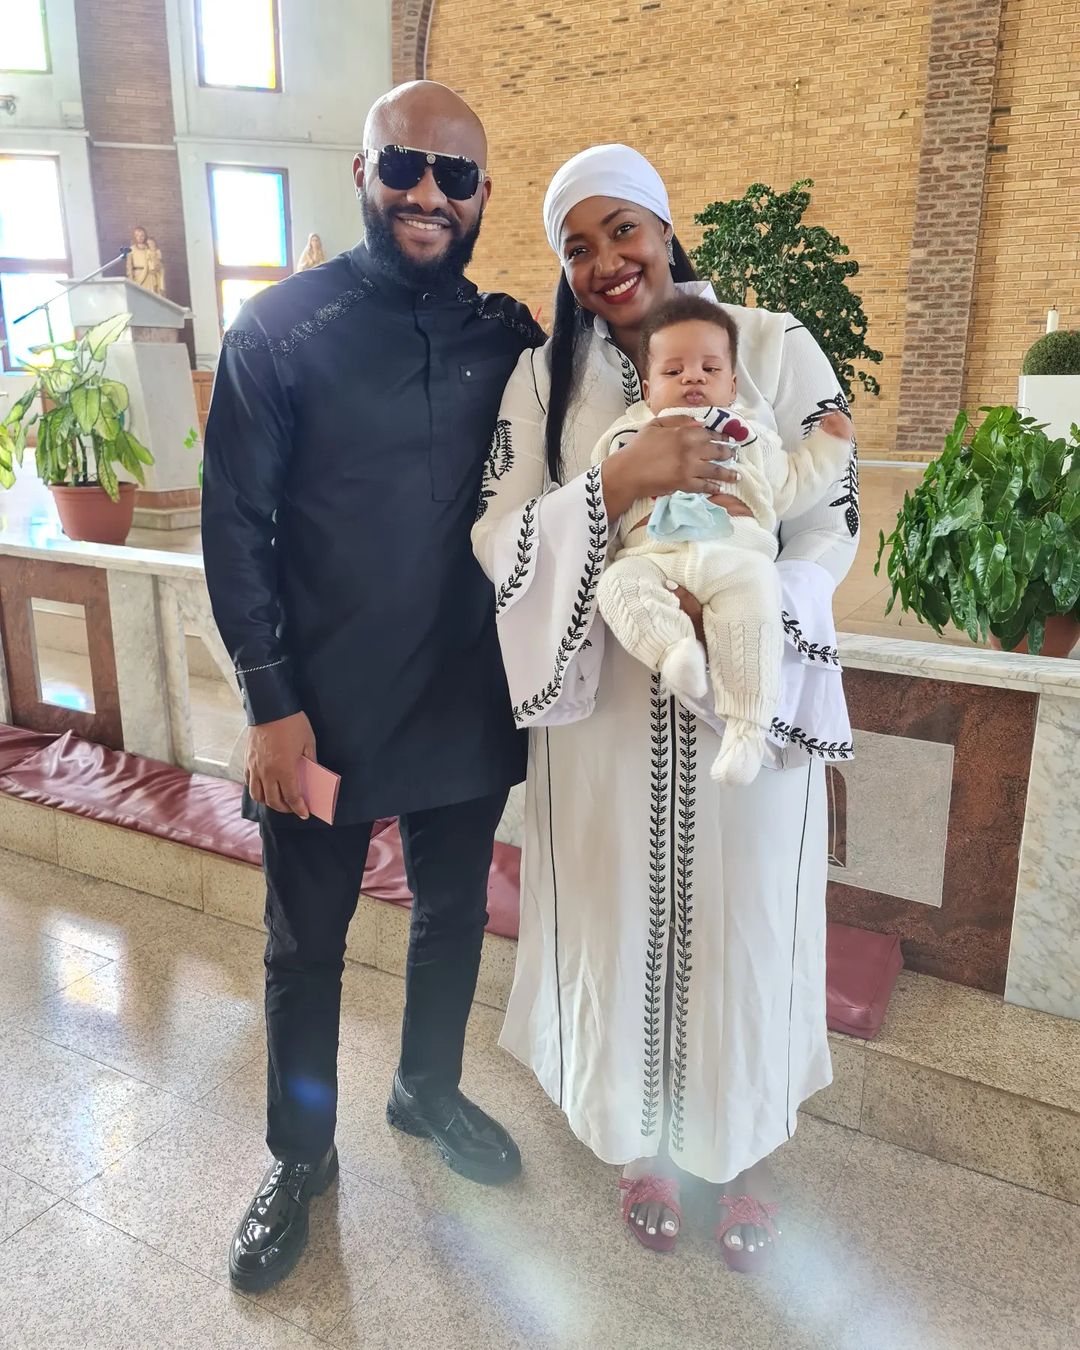 Yul Edochie and Judy Austin take their second child for baptism, share adorable photo